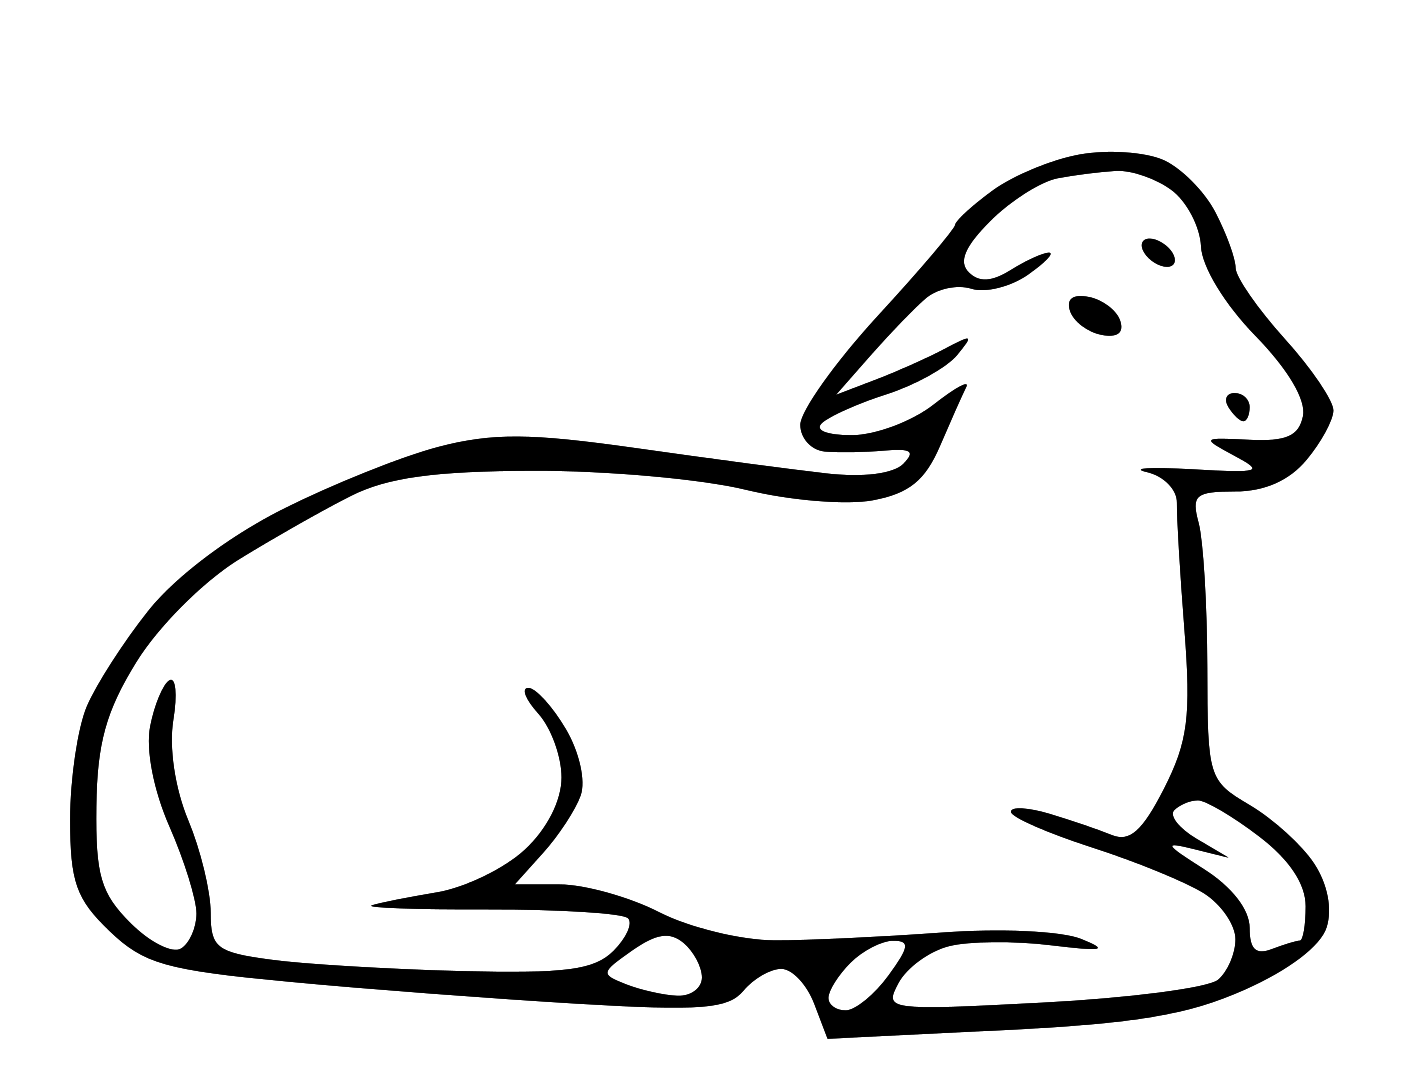 Sheep clipart silhouette black and white 